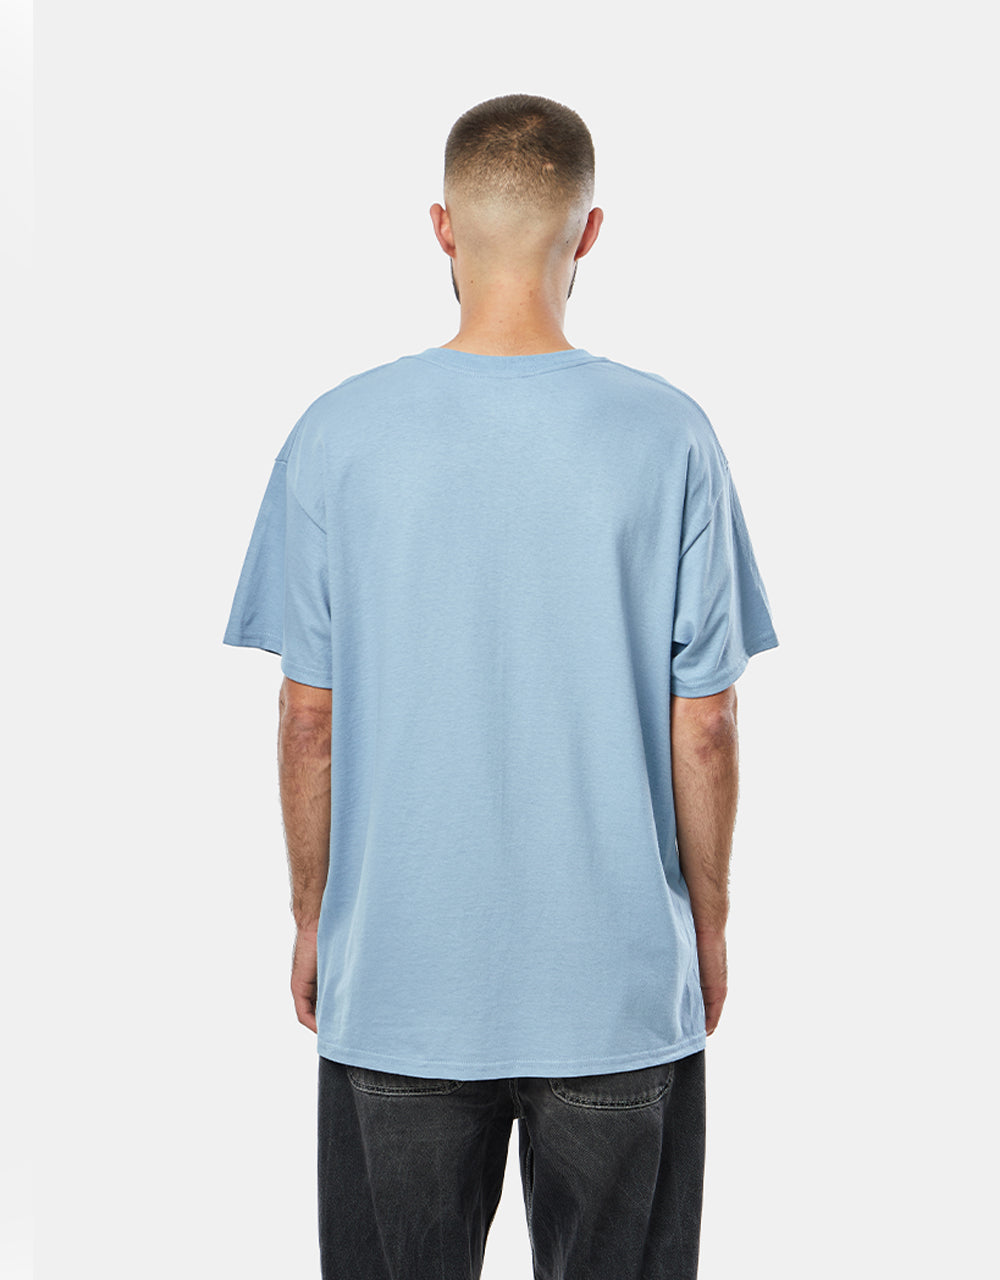 Route One Enthusiasm T-Shirt - Stone Blue